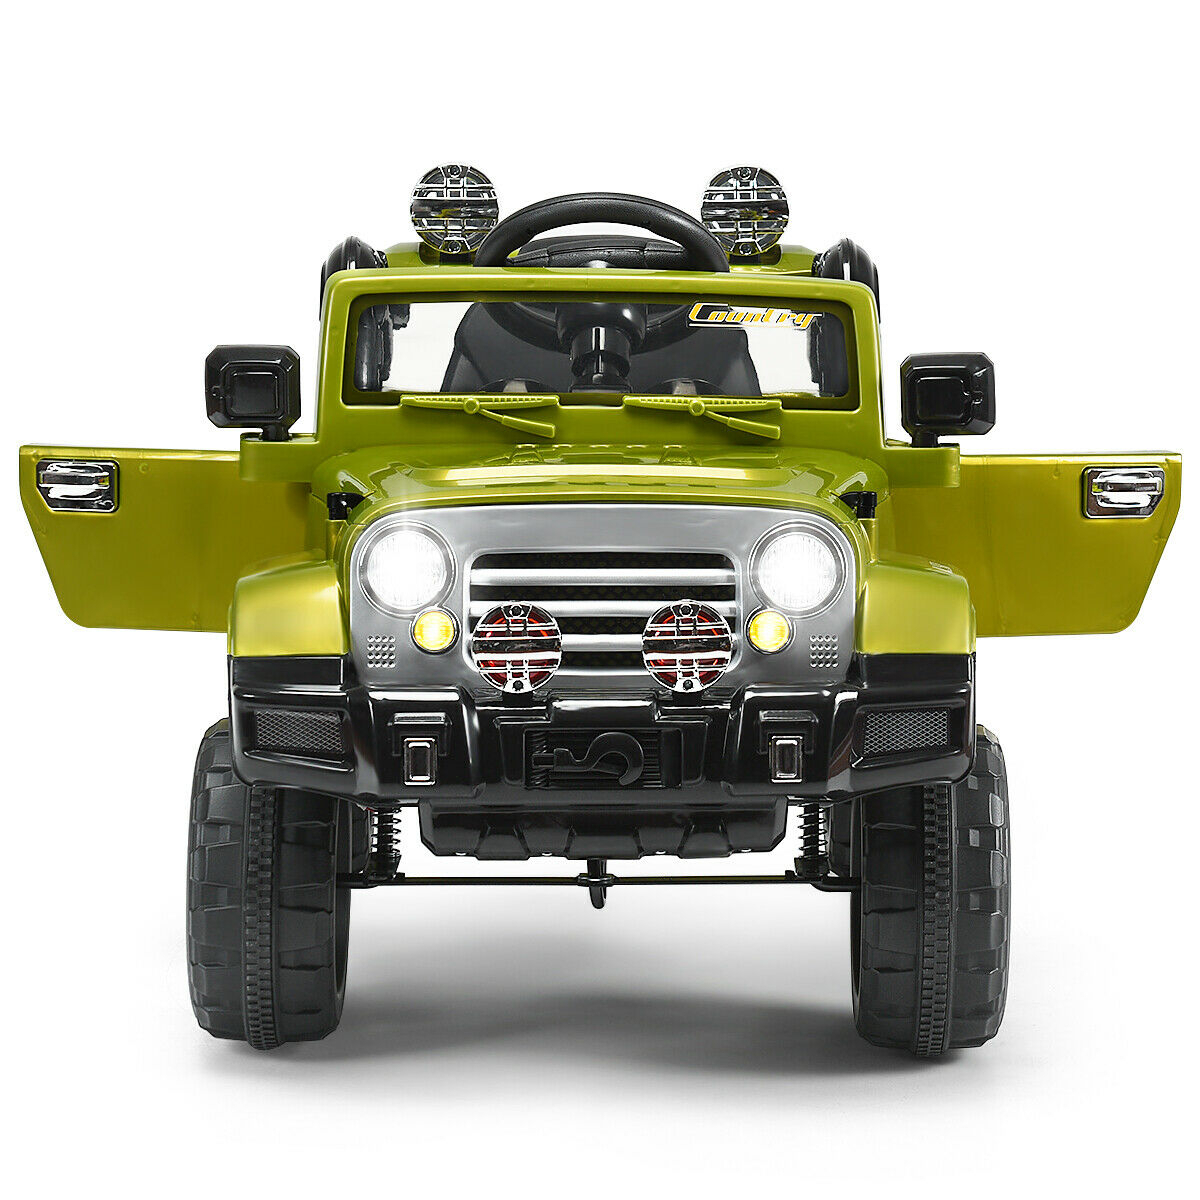 Electric Kids Ride On 12V Truck Car Green/ Black/ Camouflage - Green